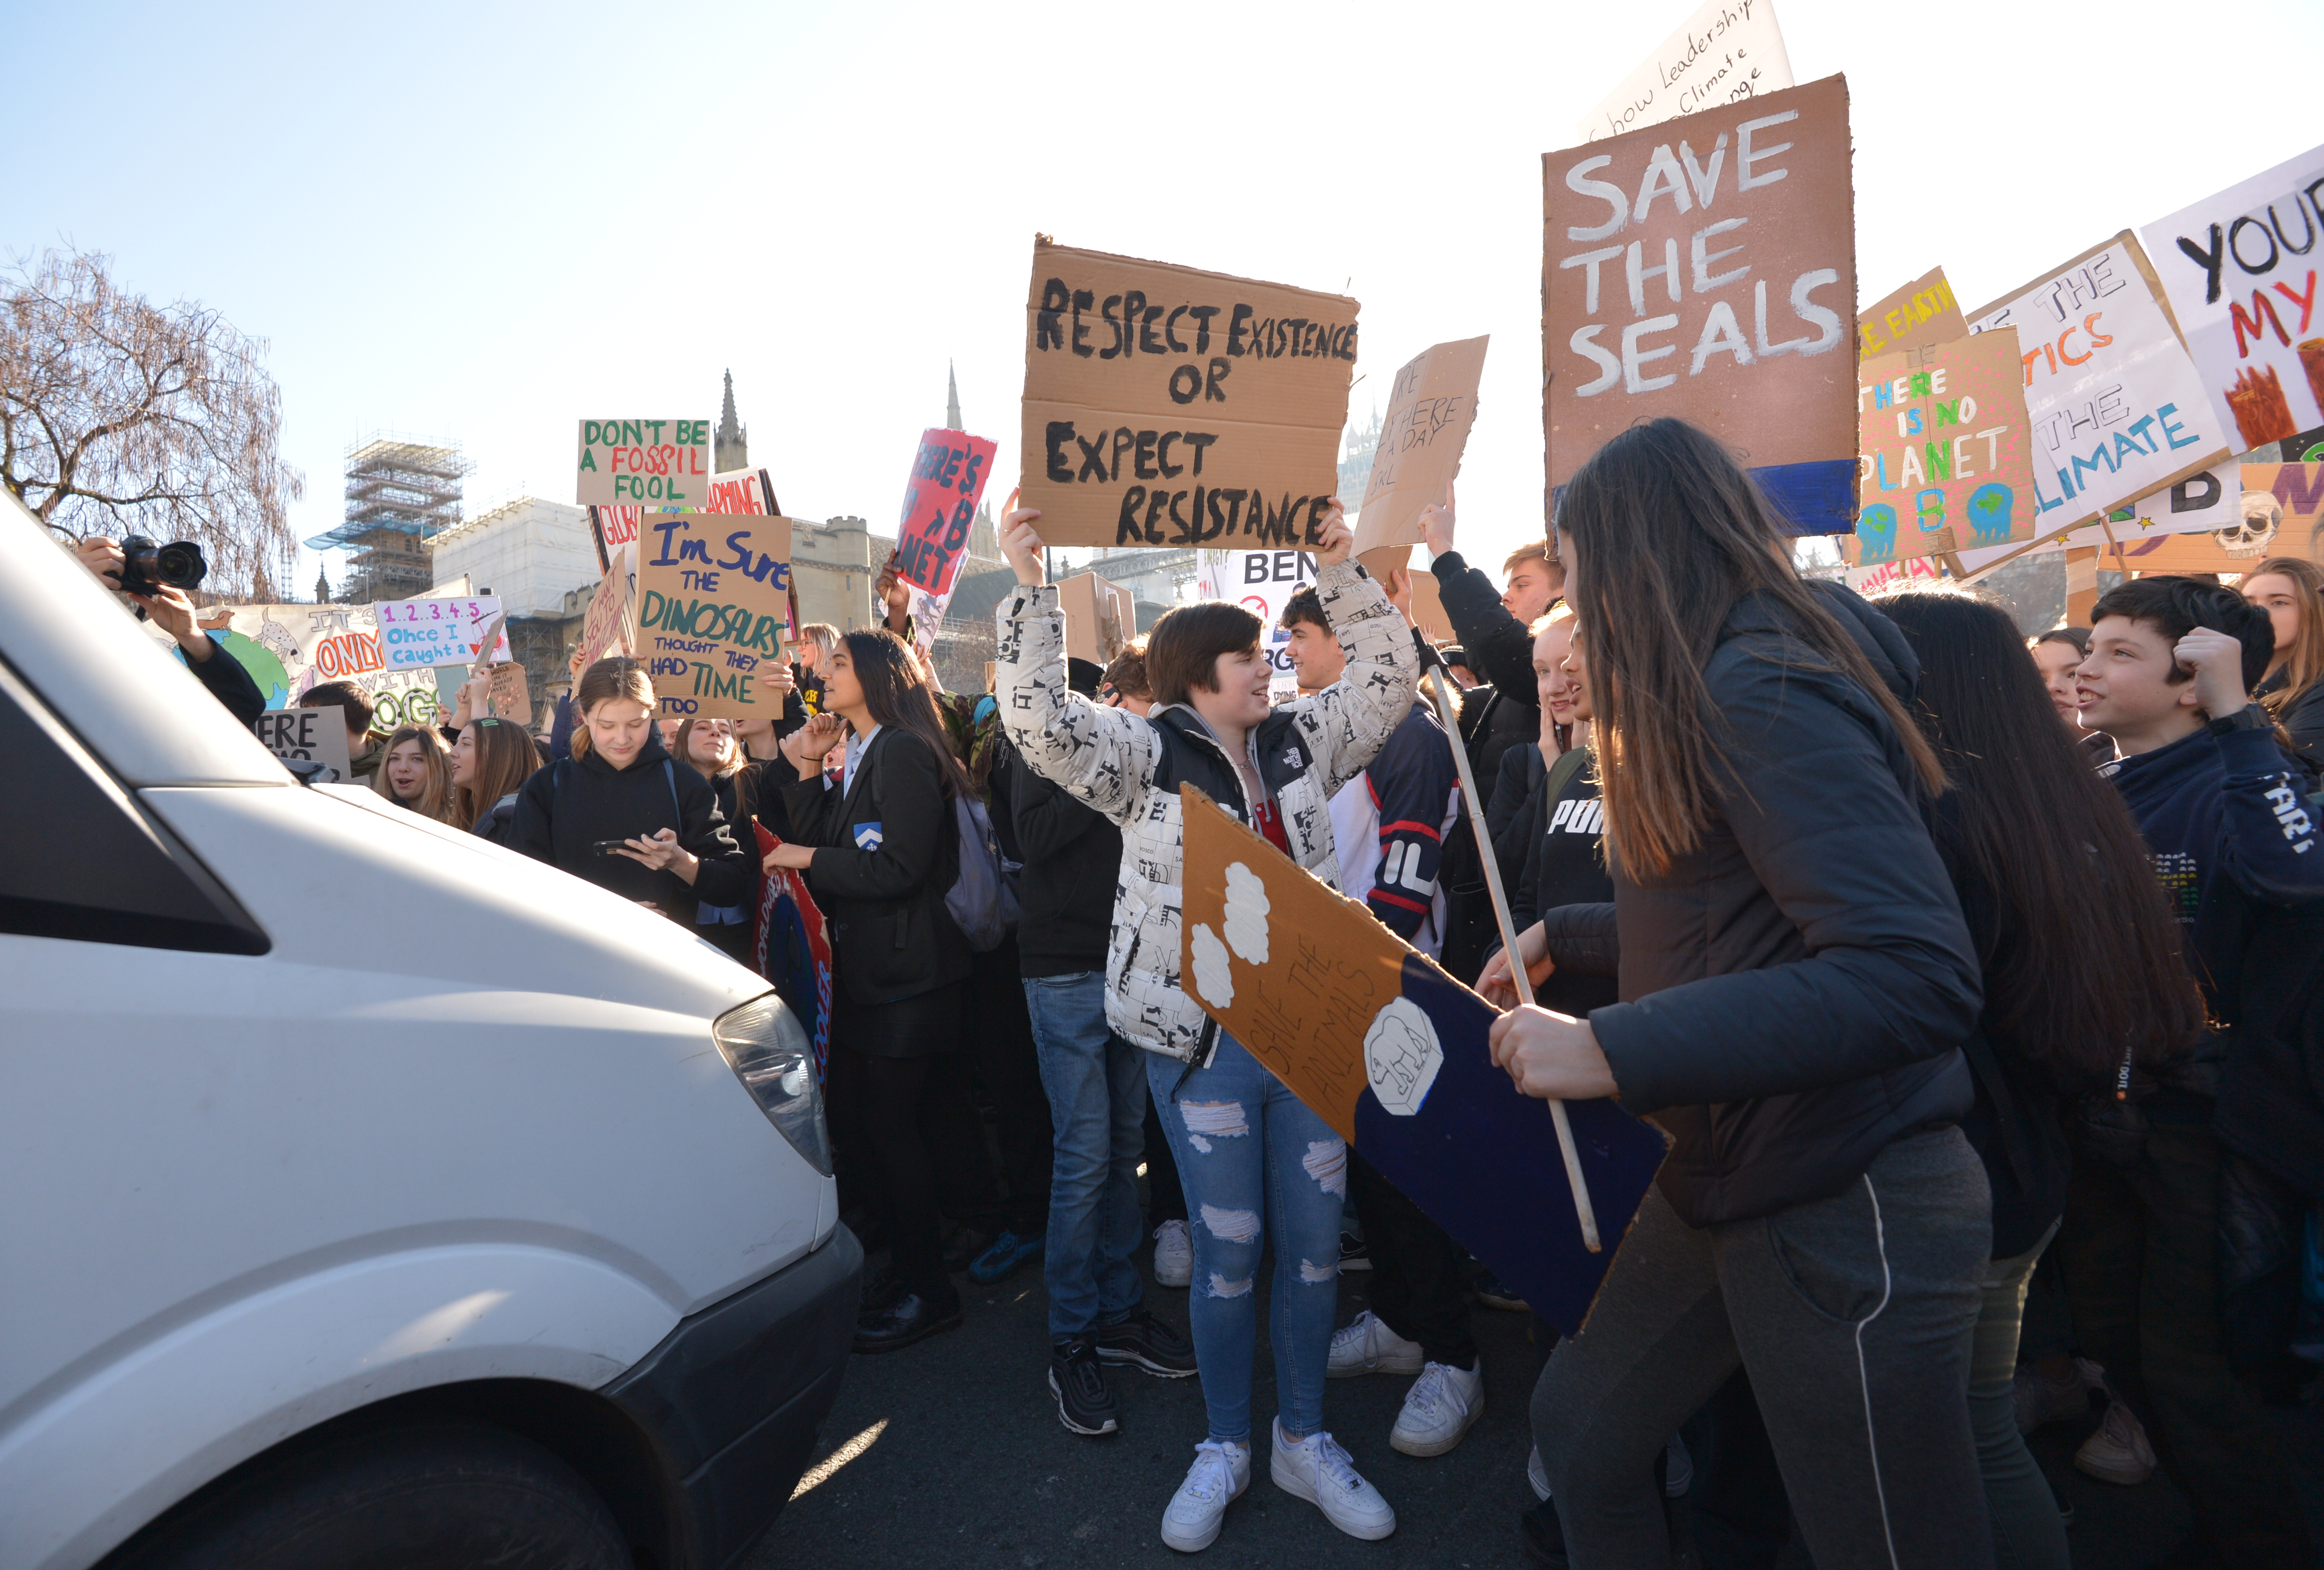 Students from the Youth Strike 4 Climate movement blocking traffic during a climate change protest on Parliament Square in Westminster, London